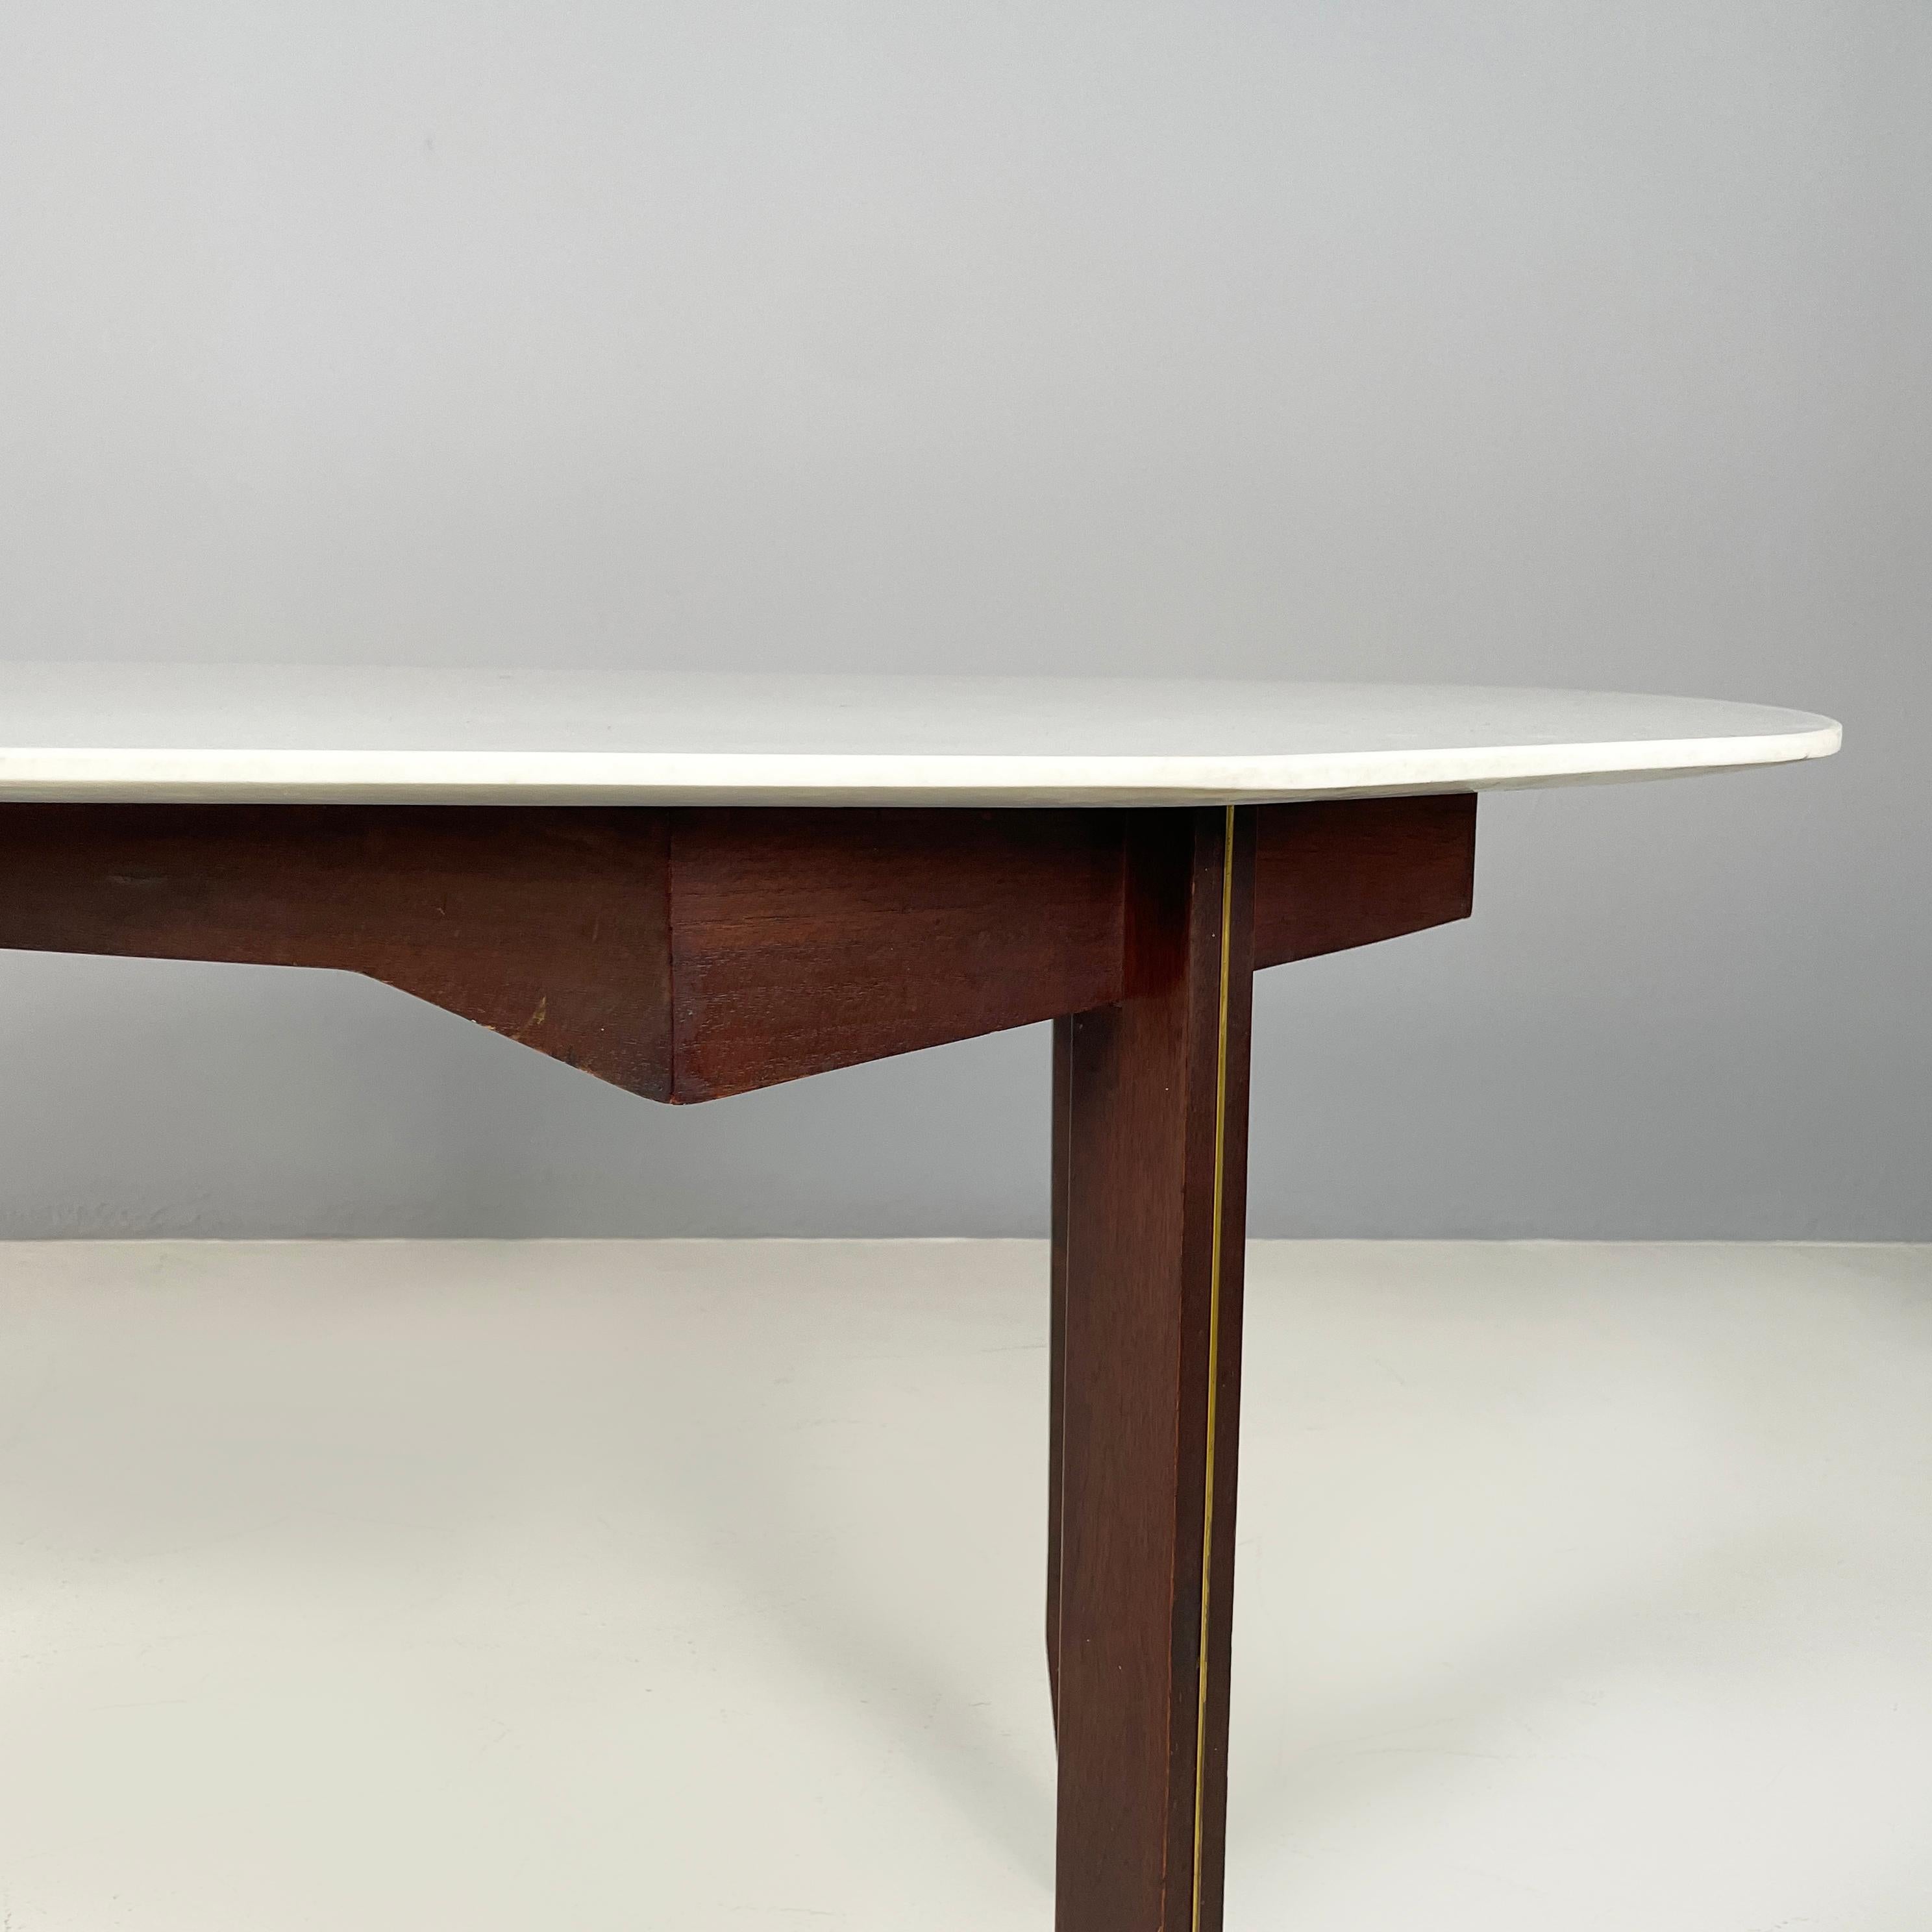 Italian mid-century modern Dining table in marble, wood and bass, 1960s For Sale 2